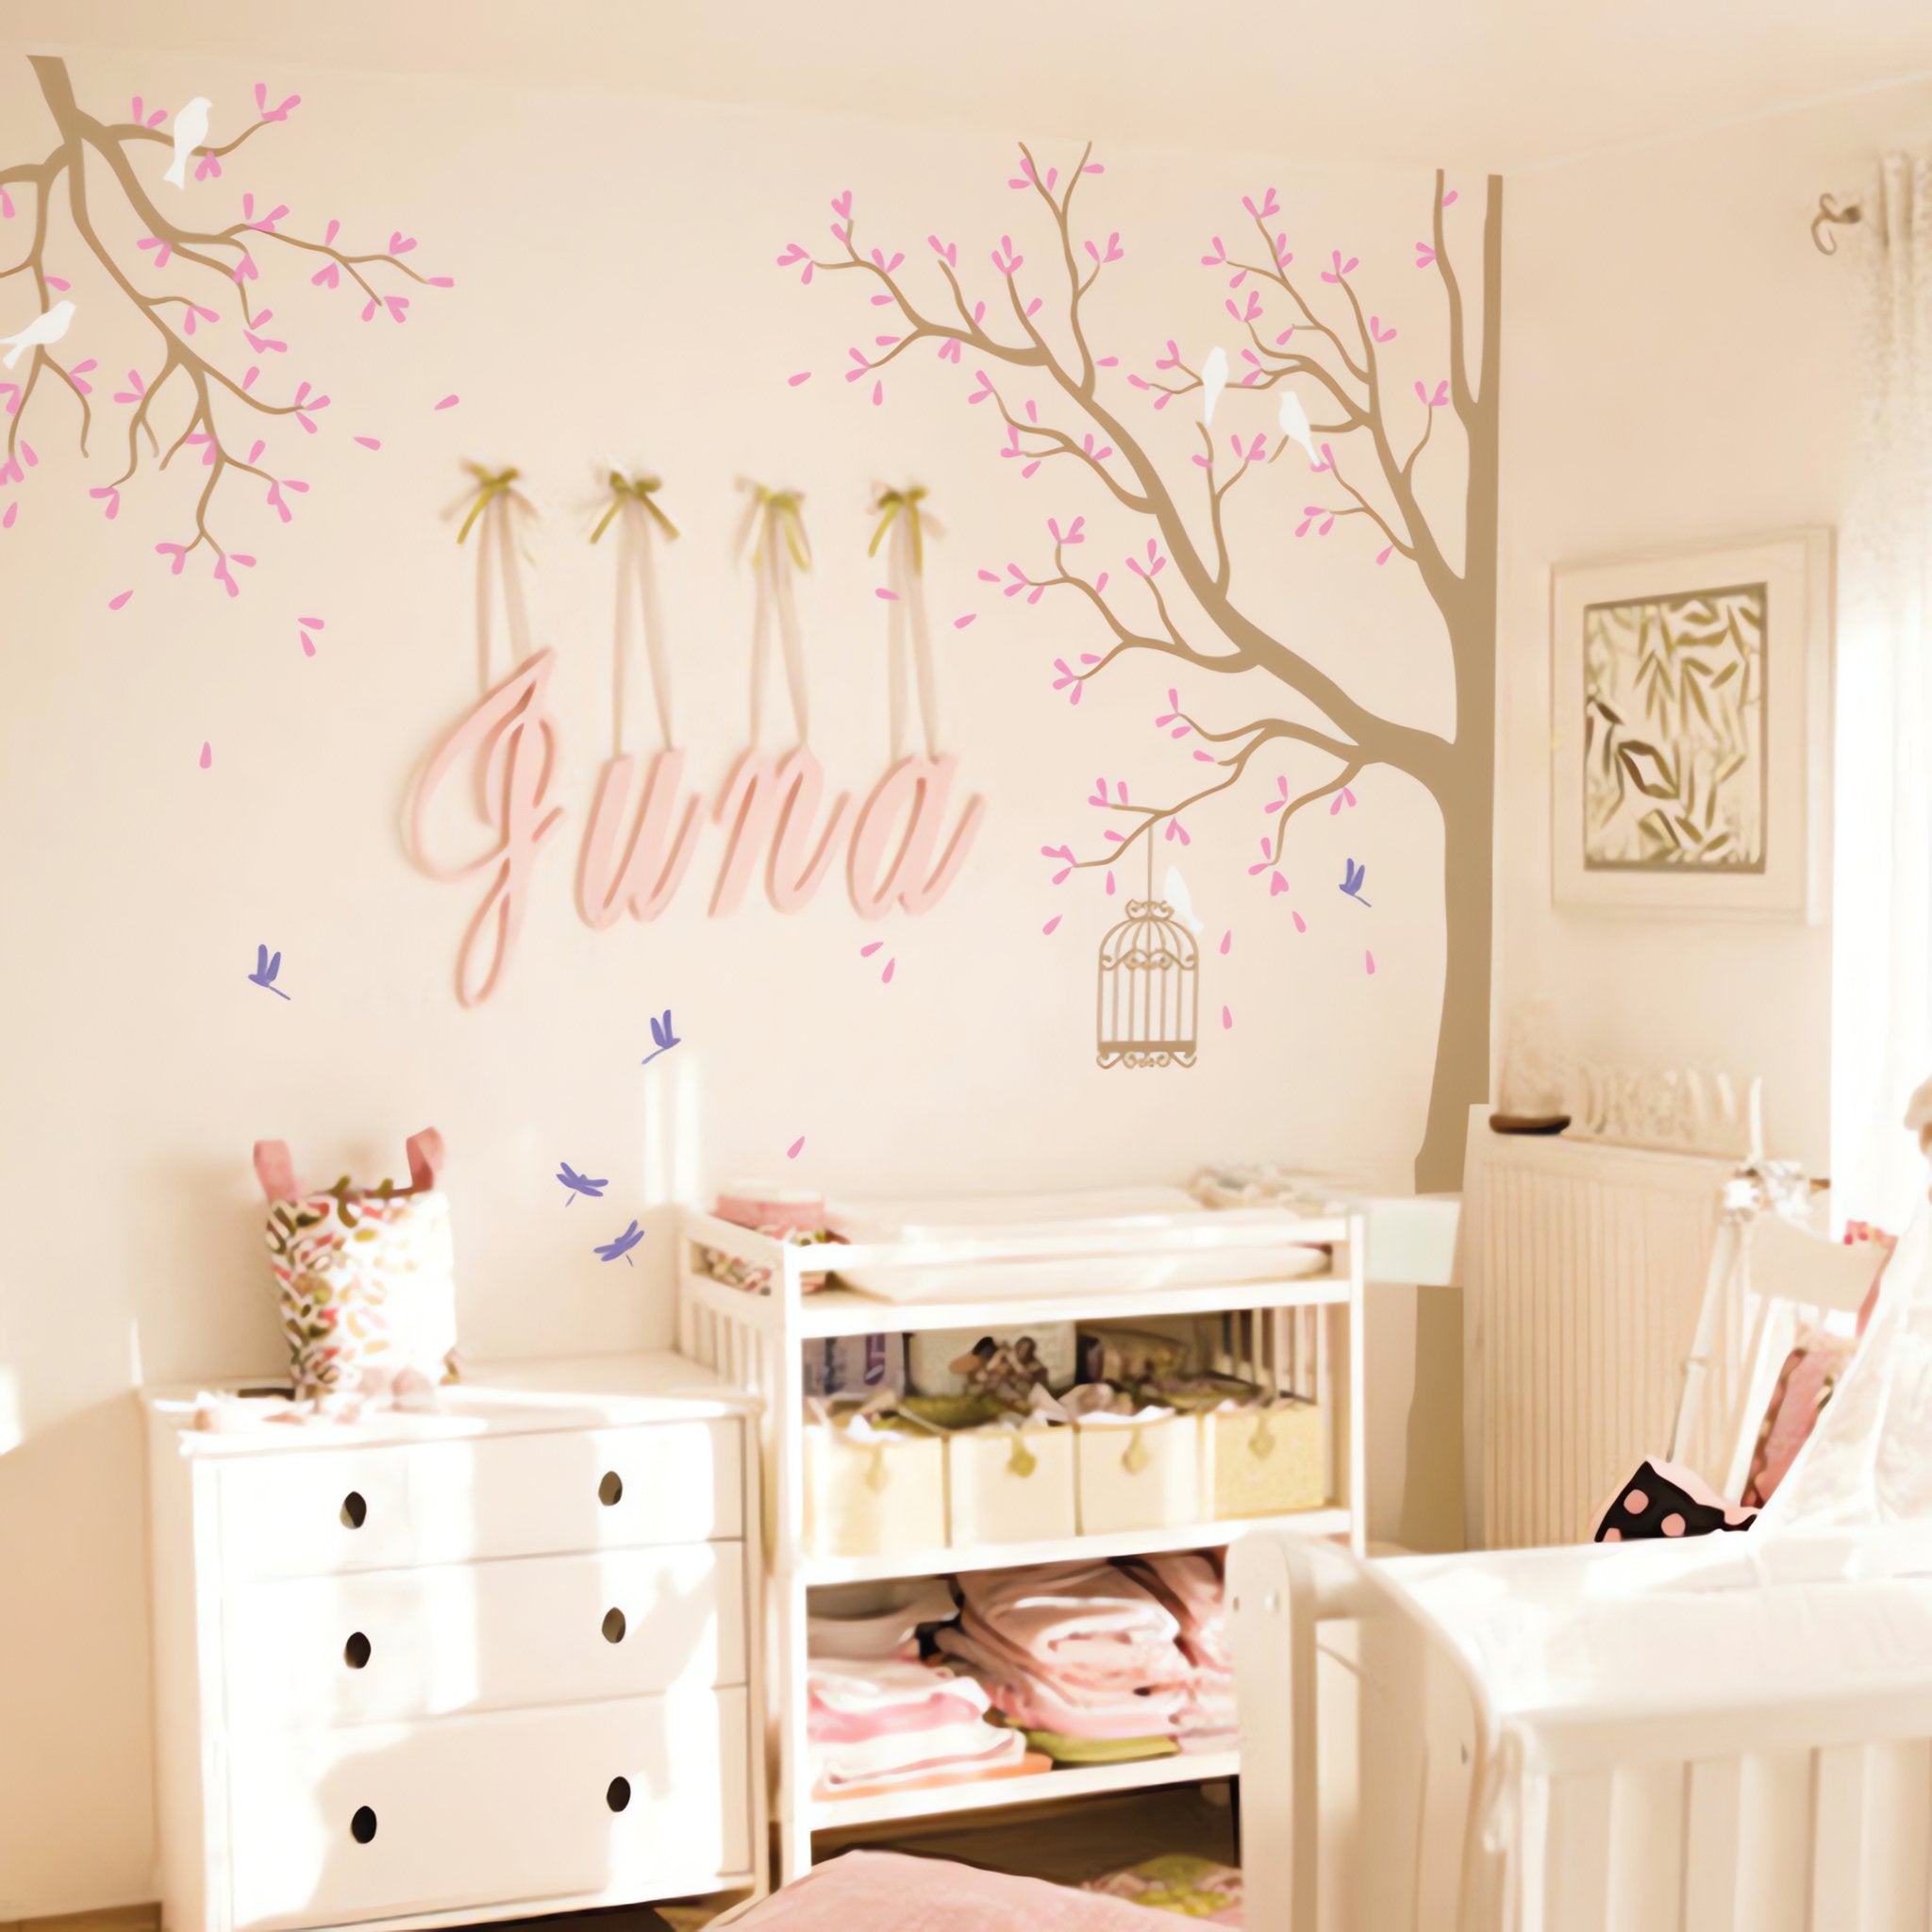 Tree wall sticker withbirds and dragonflies in a bright room with chairs and furniture.